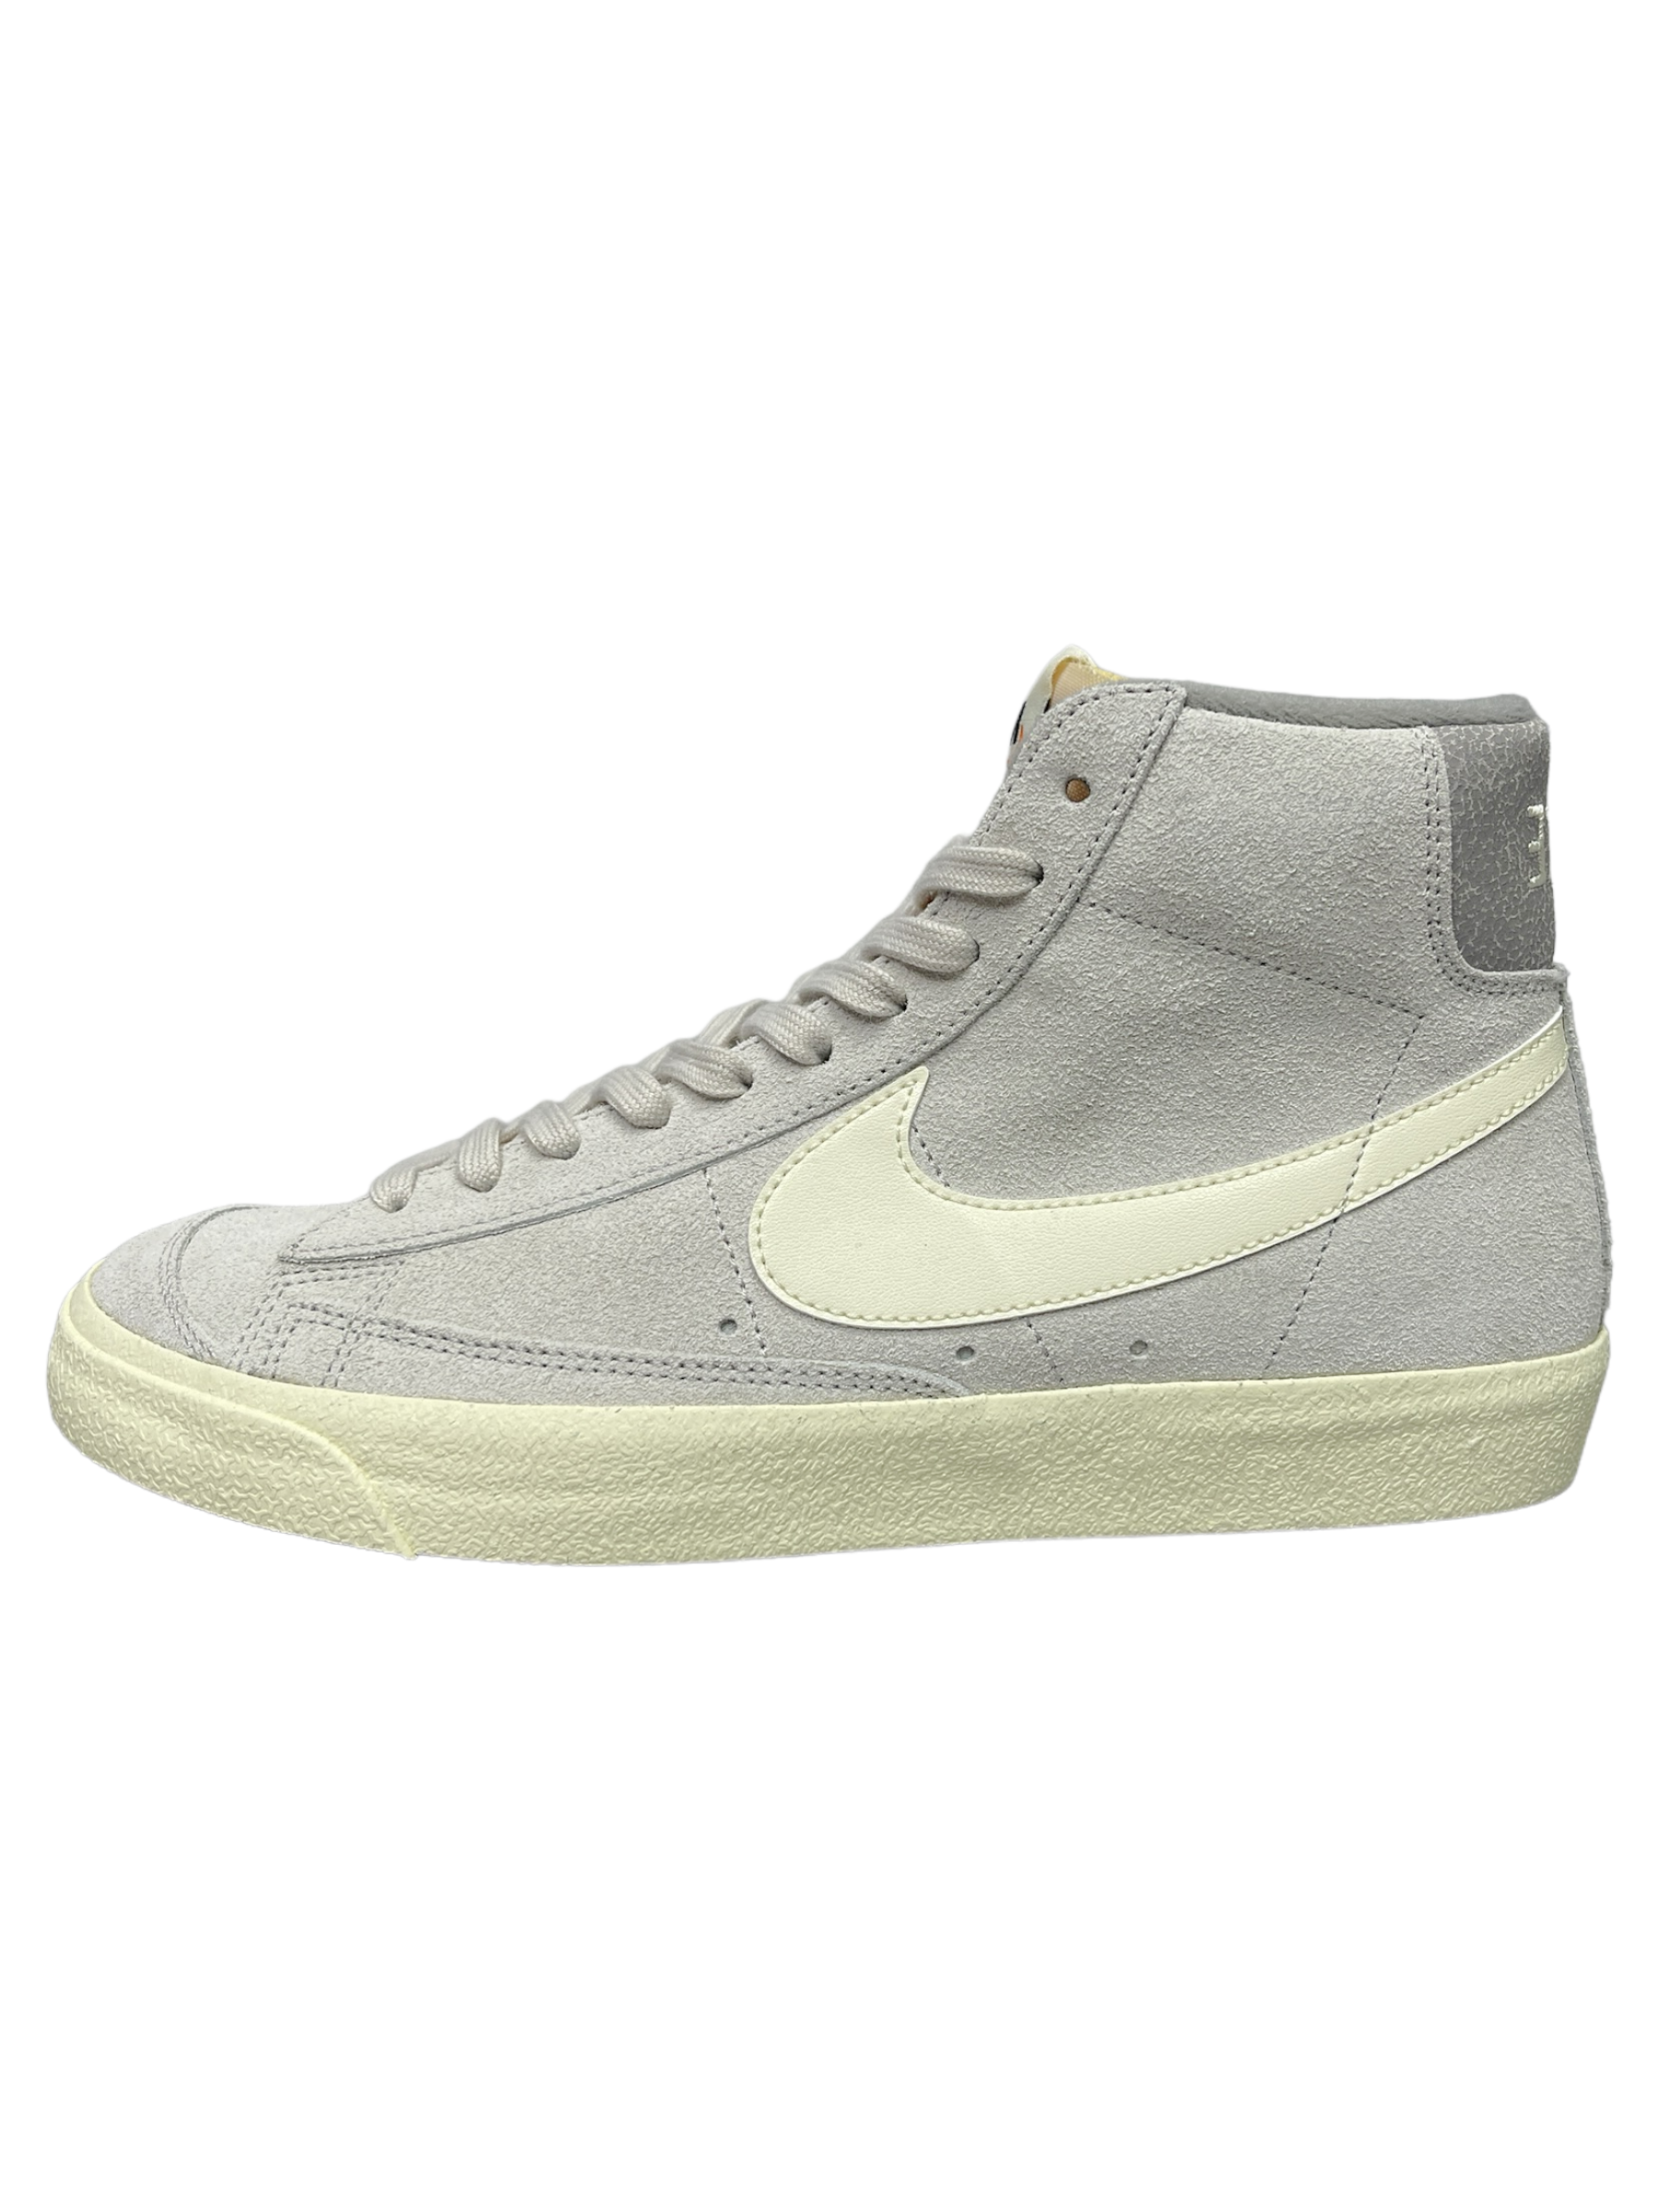 Nike Blazer Mid '77 PRM Medium Grey - Genuine Design Luxury Consignment for Men. New & Pre-Owned Clothing, Shoes, & Accessories. Calgary, Canada